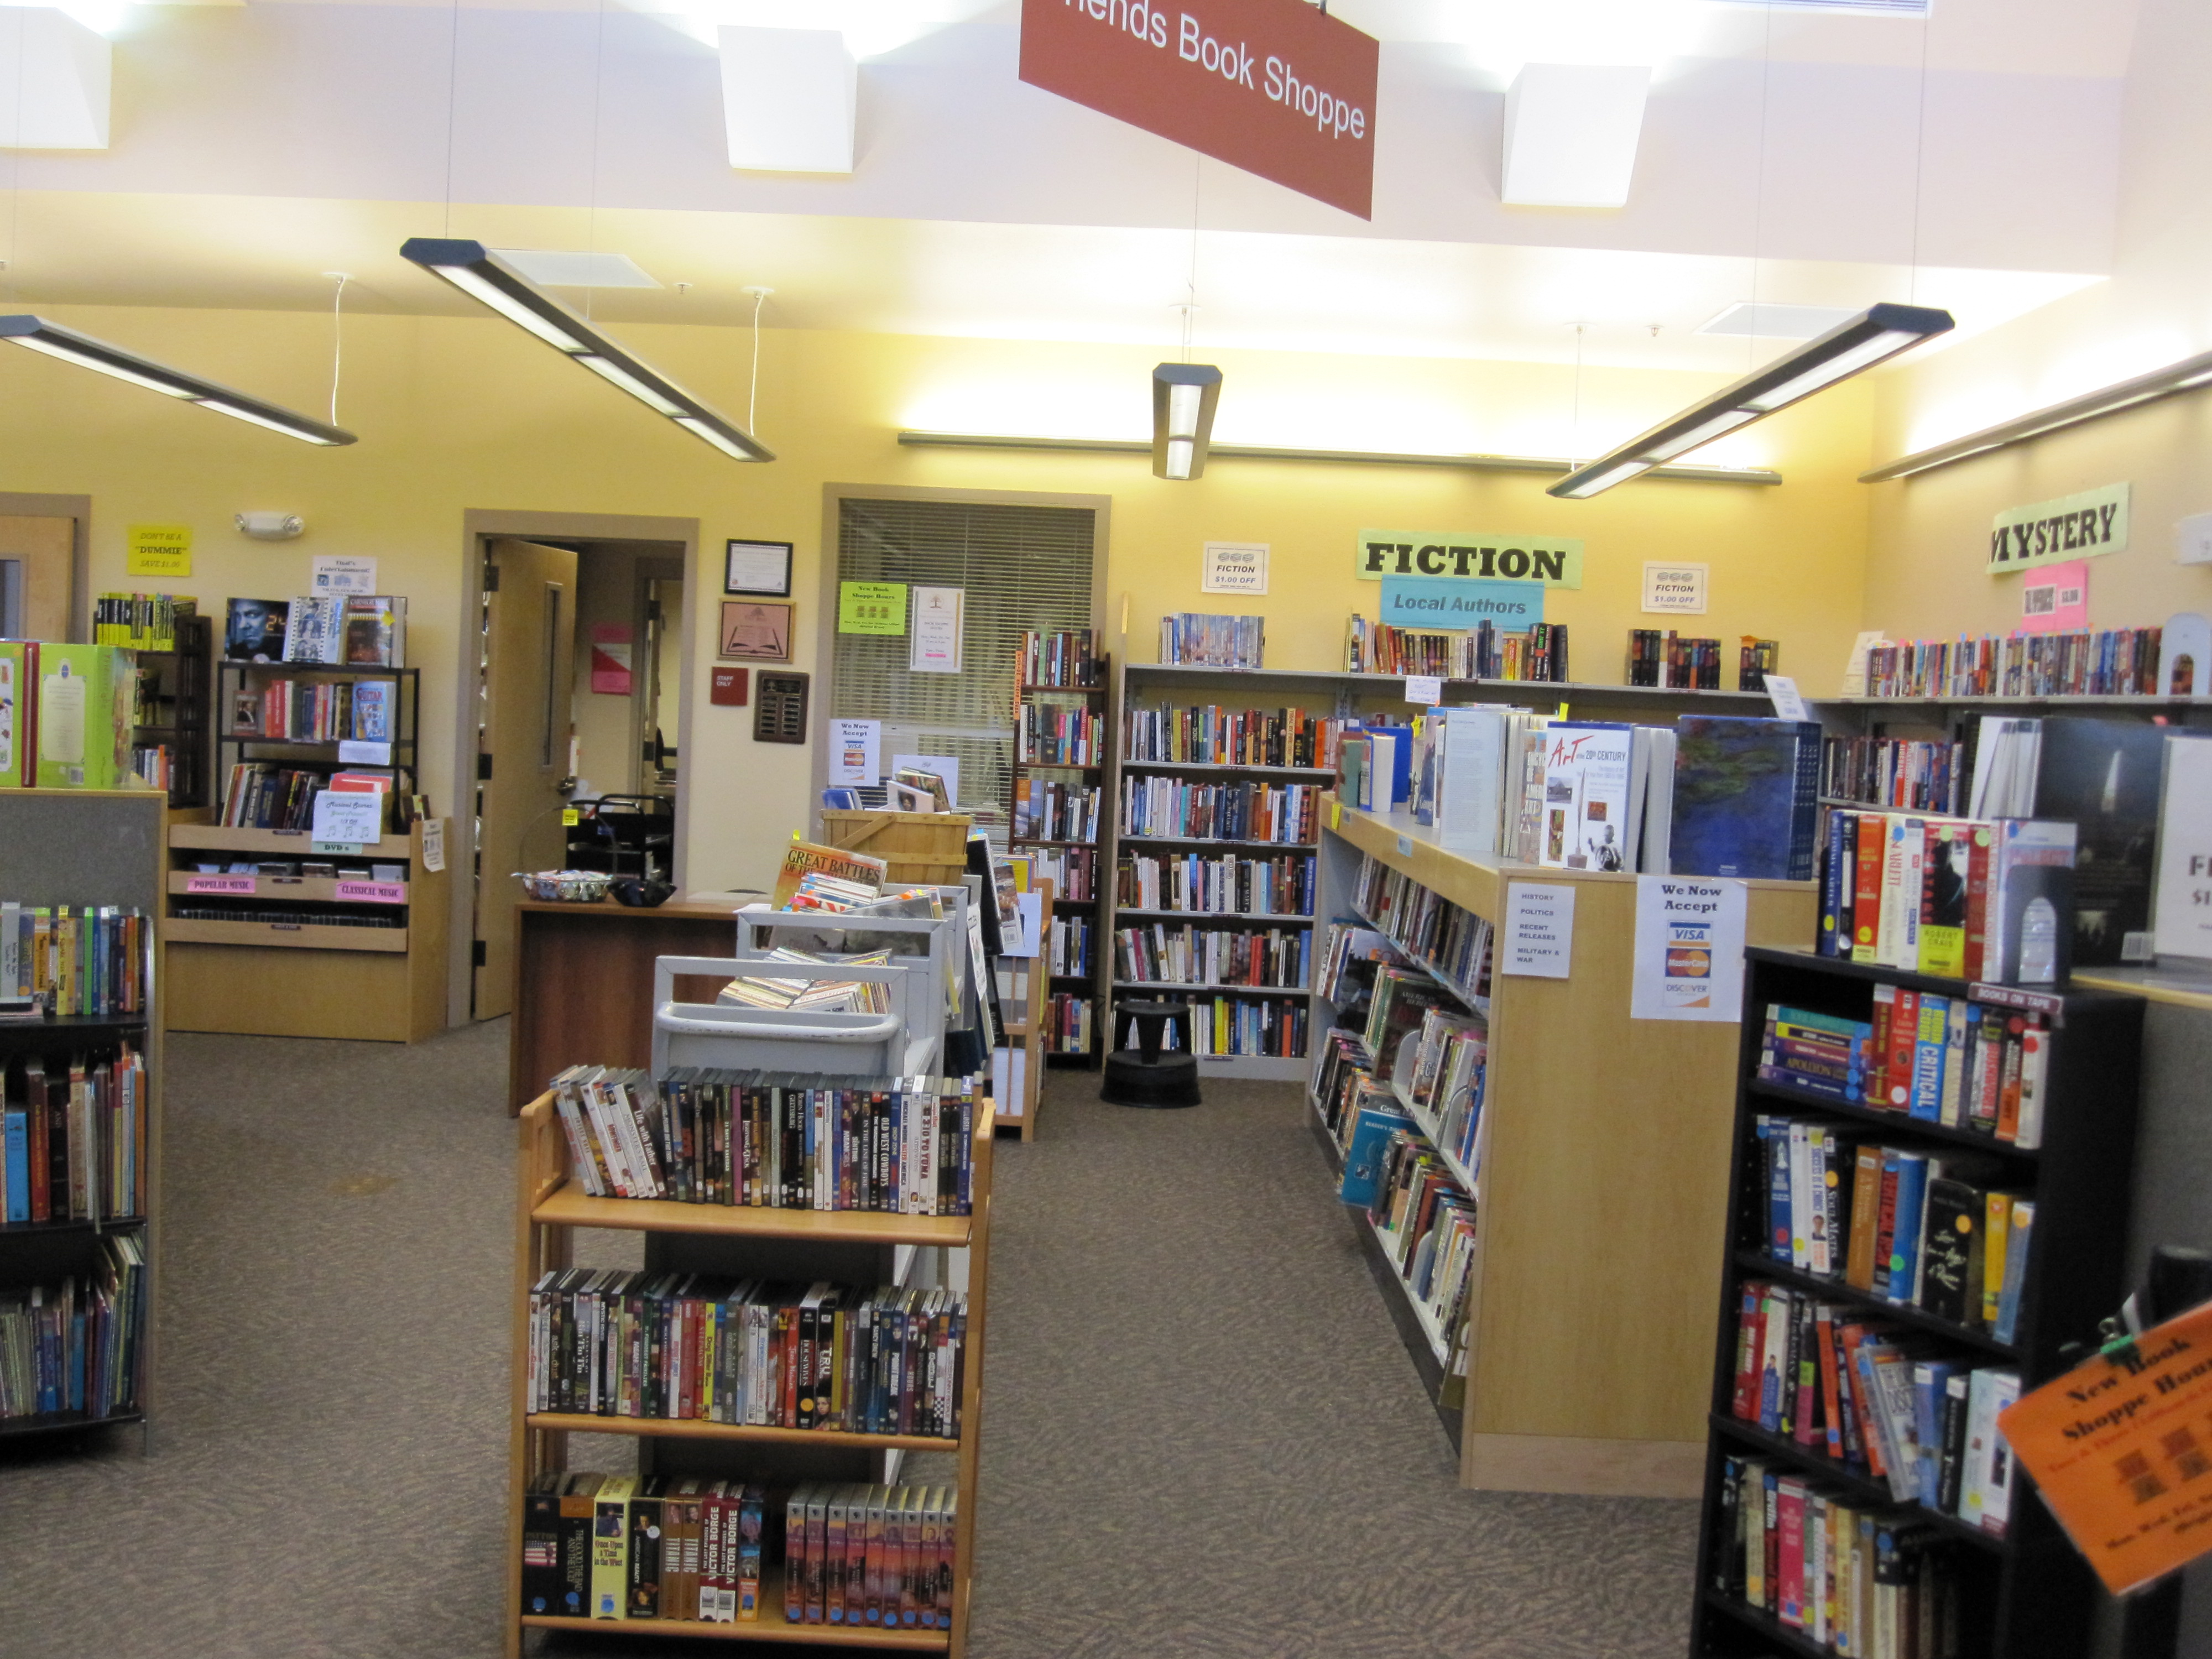 The Friends Book Shoppe has more than 8,000 books from which to choose.